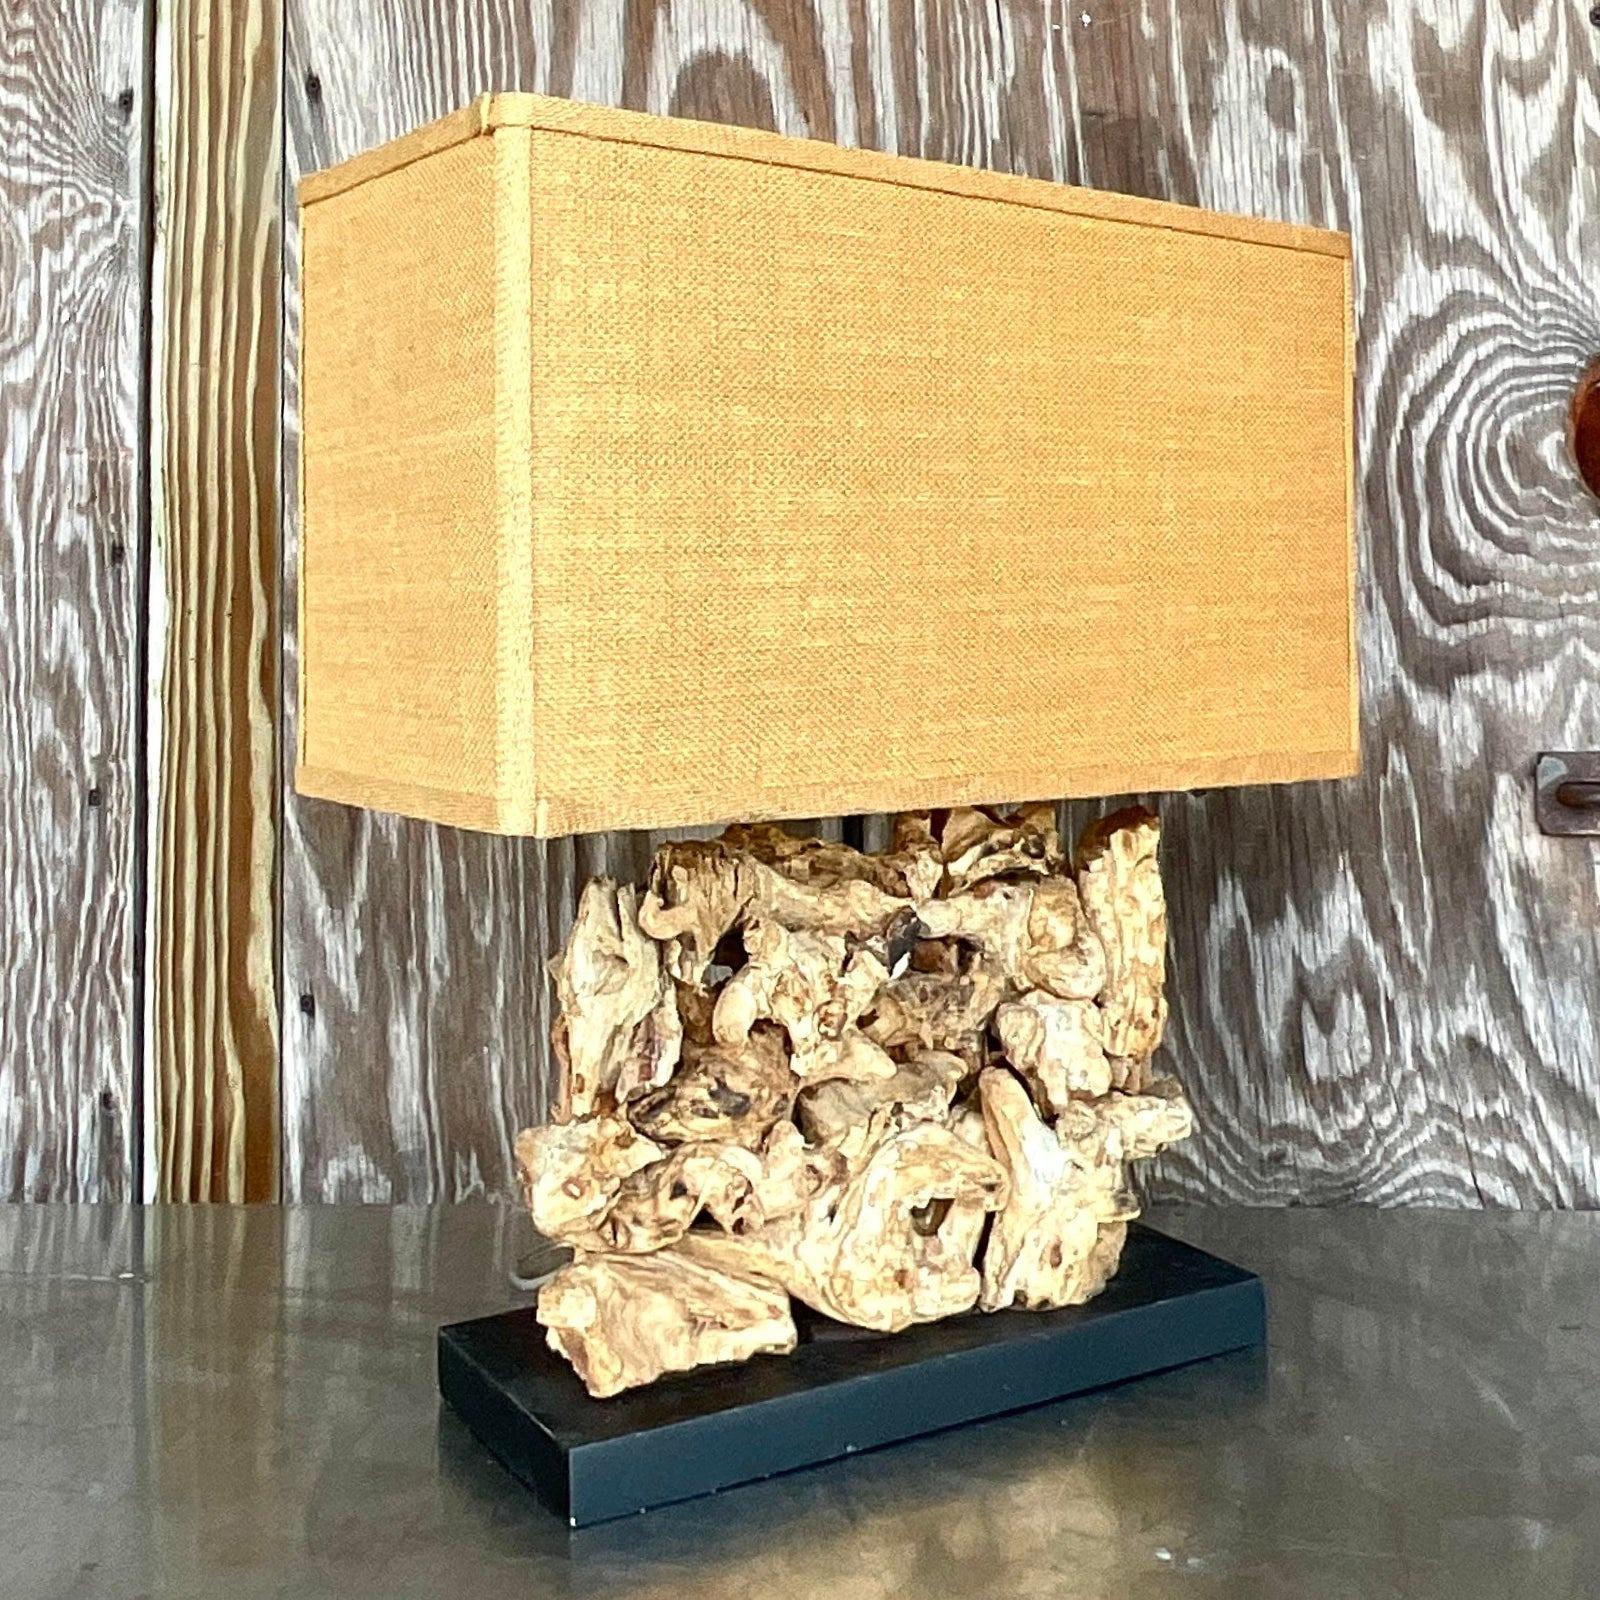 A fabulous vintage Boho table lamp. A chic block of wood knots with a coordinating burlap shade. Acquired from a Palm Beach estate.